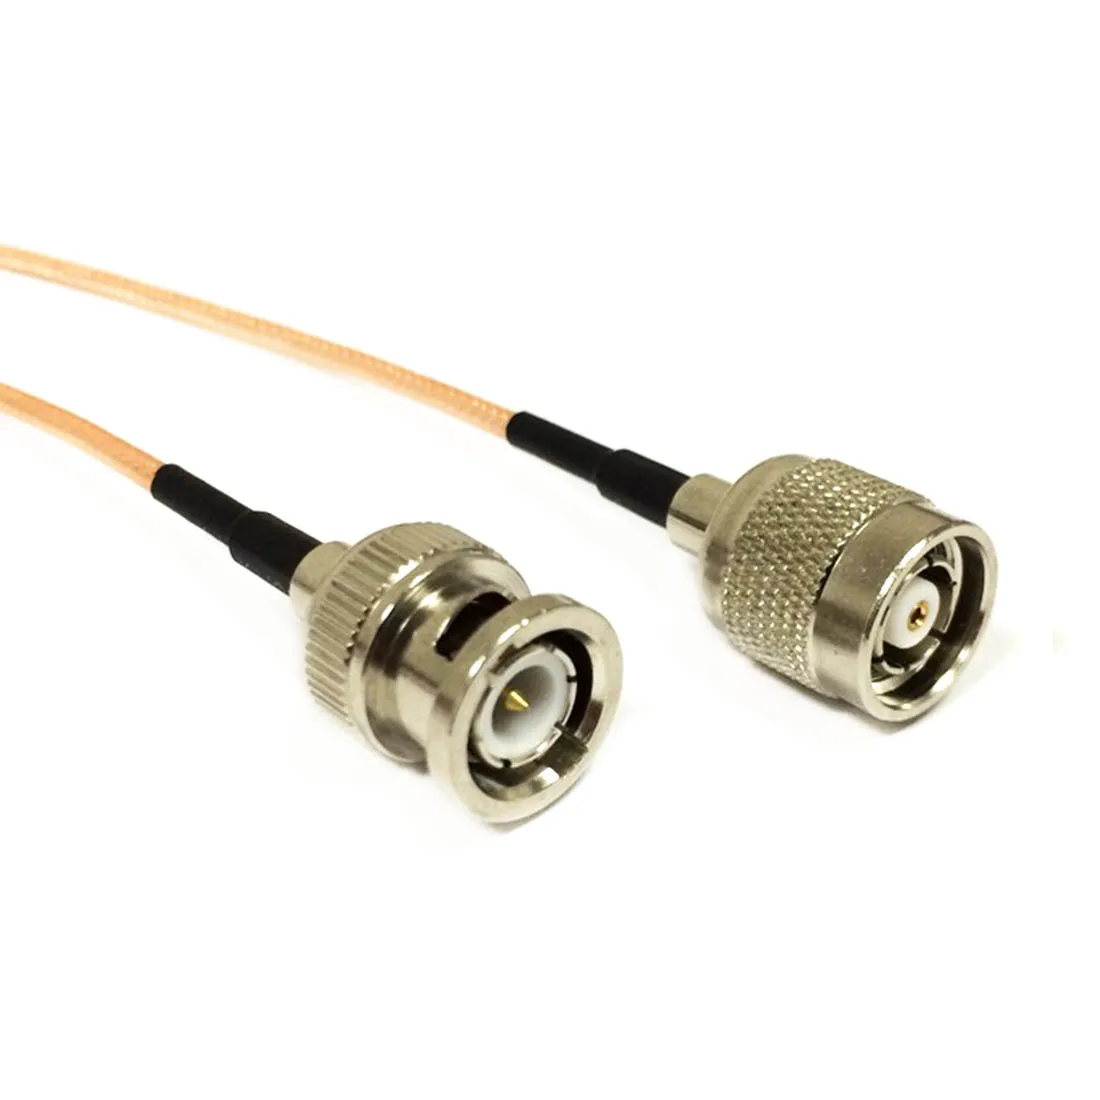 

Modem Coaxial Cable RP-TNC Male Plug Switch BNC Male Plug Connector RG316 Cable Pigtail 15cm 6" Adapter New